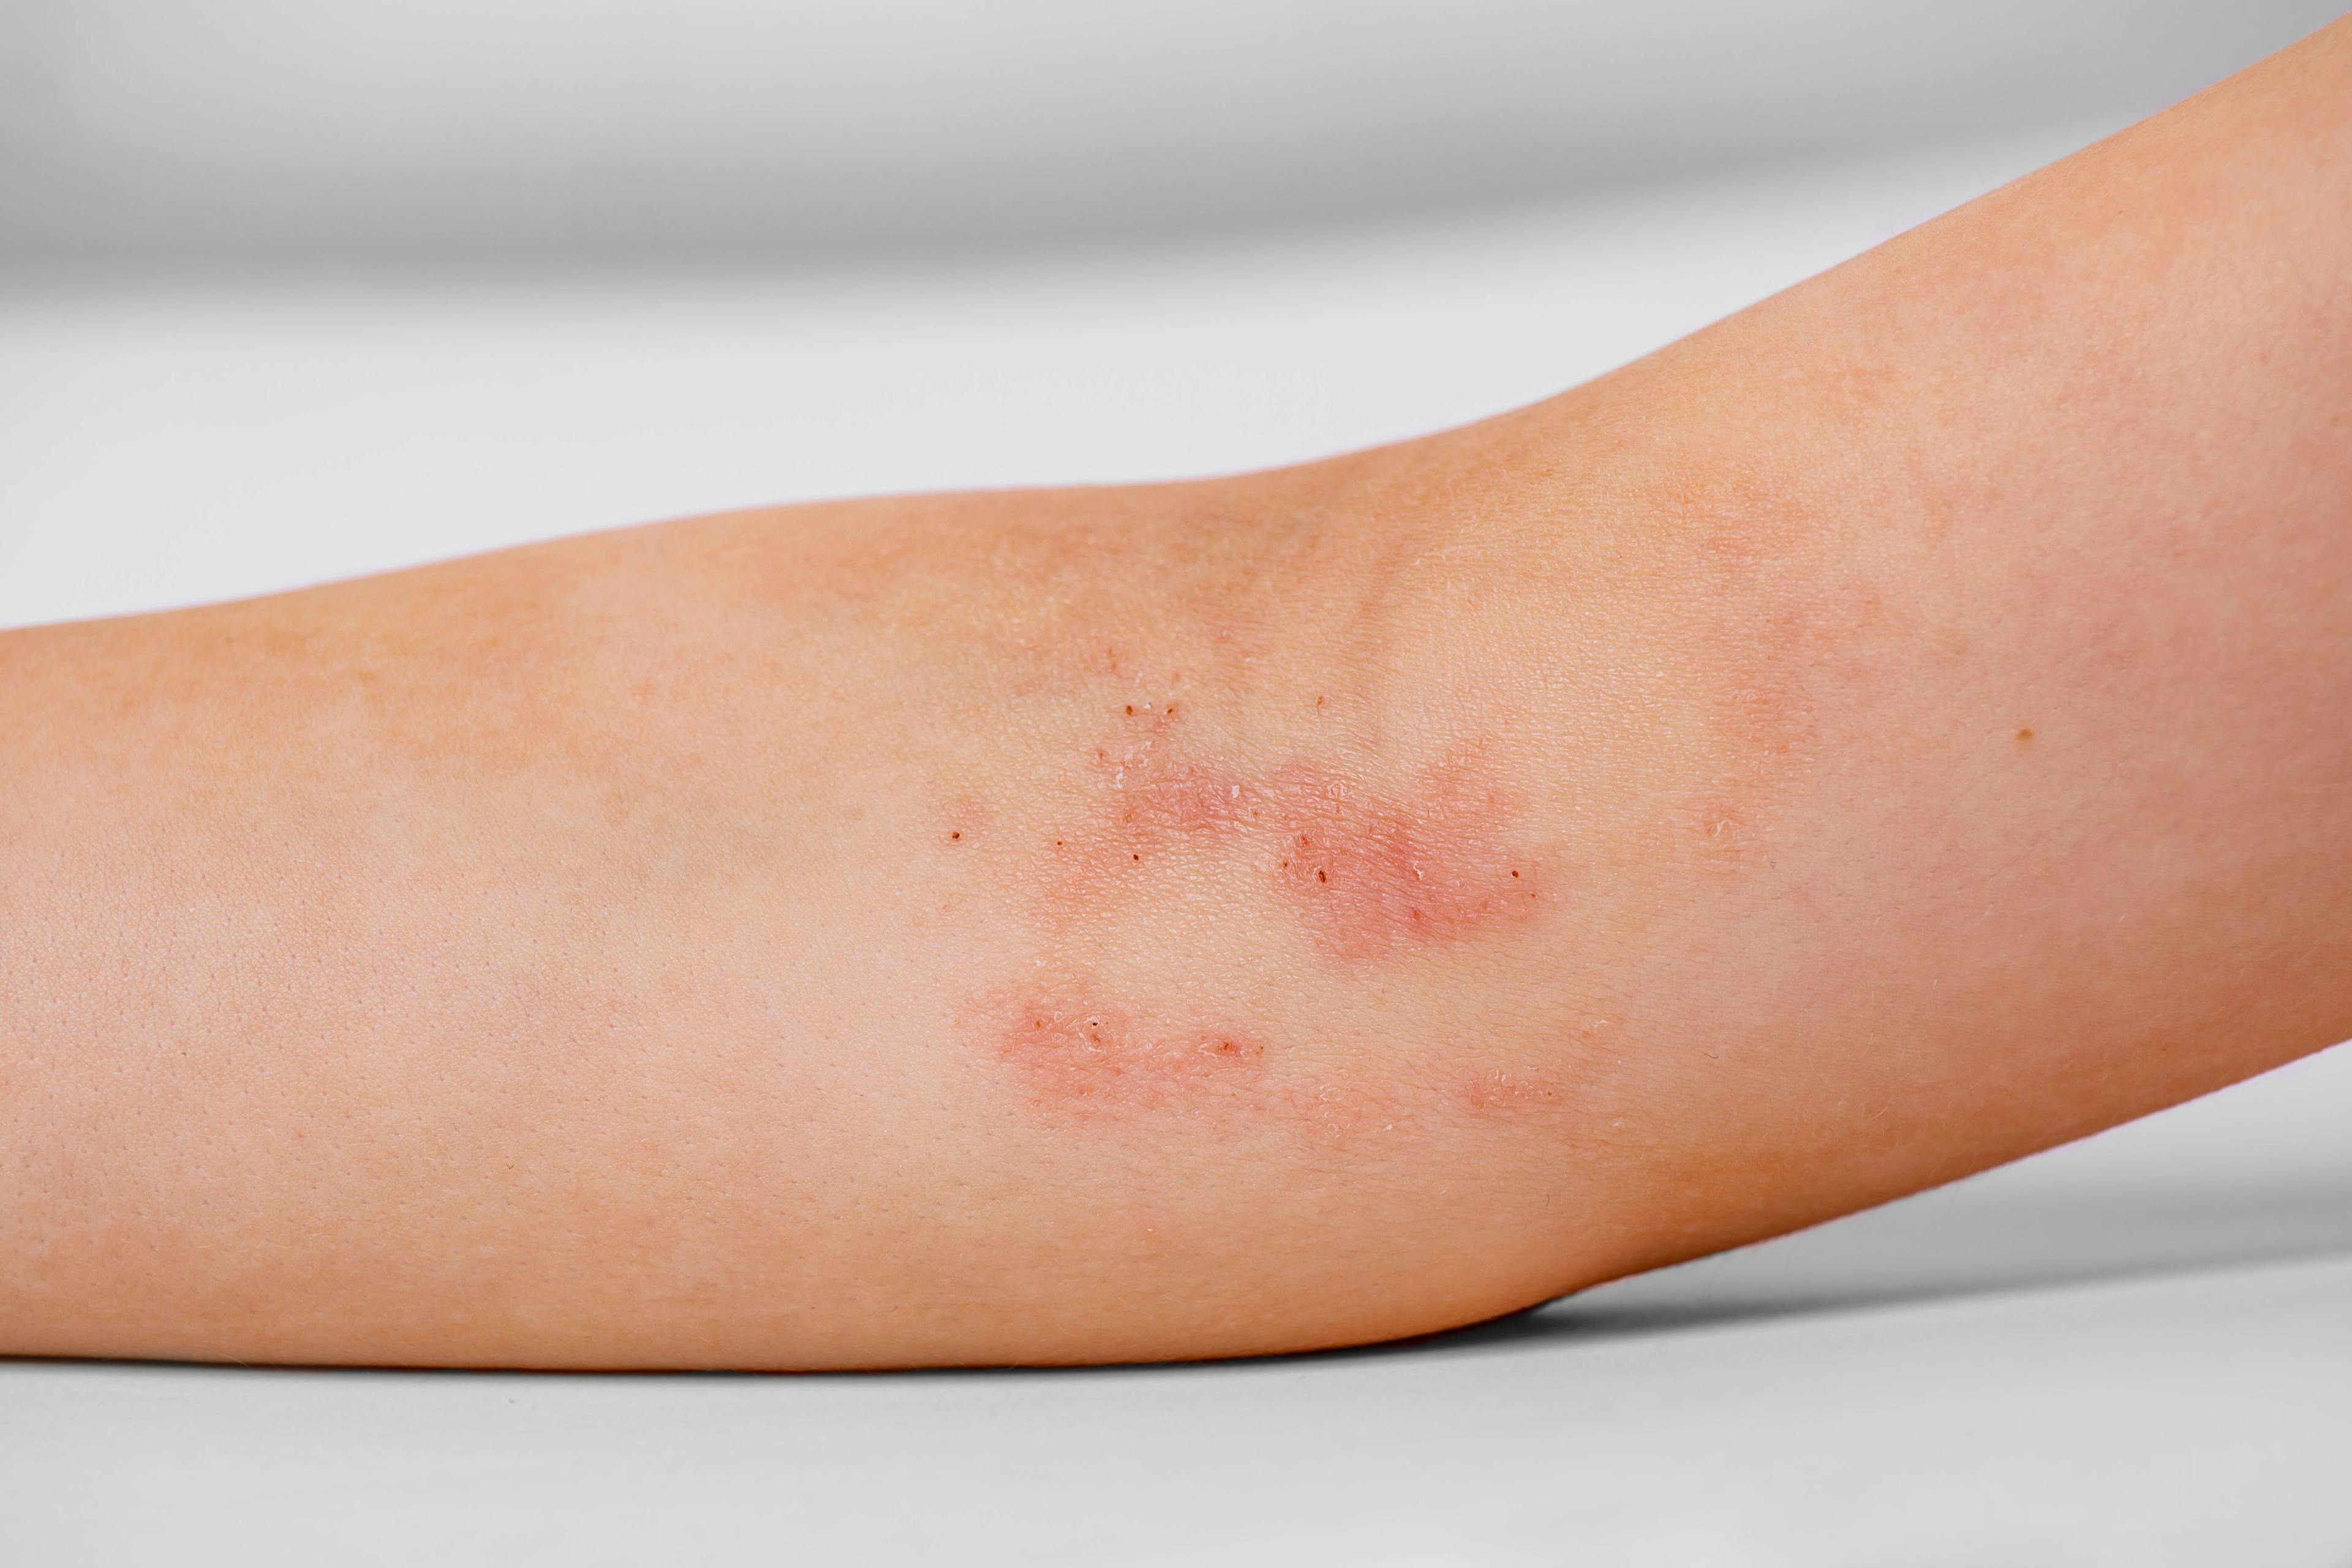 New and Emerging Treatments for Atopic Dermatitis